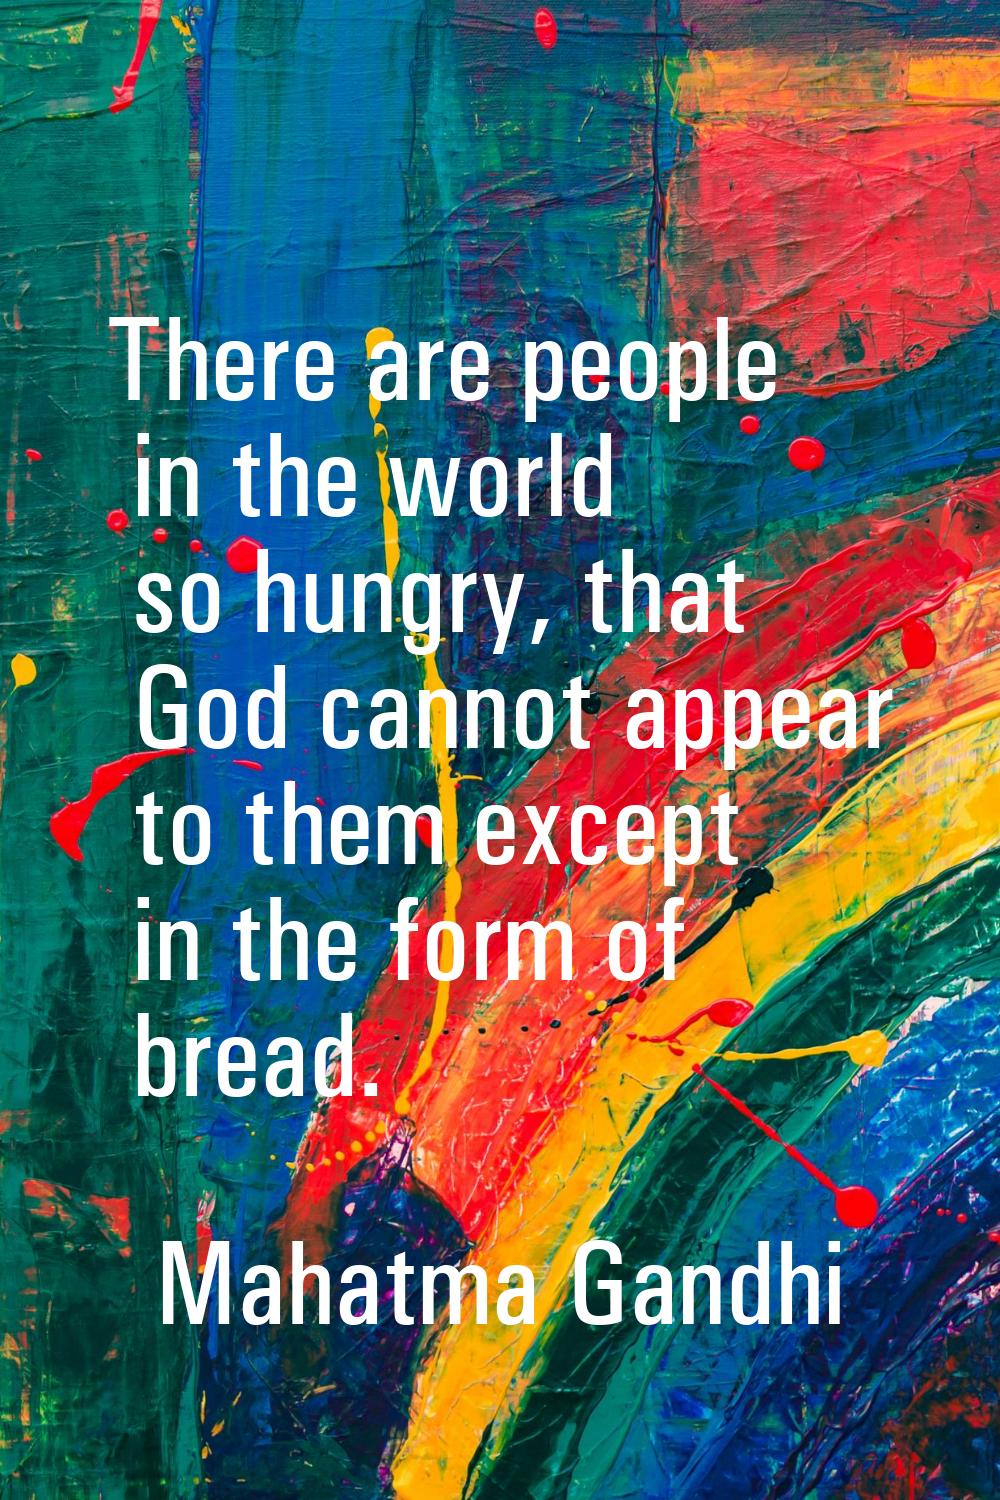 There are people in the world so hungry, that God cannot appear to them except in the form of bread